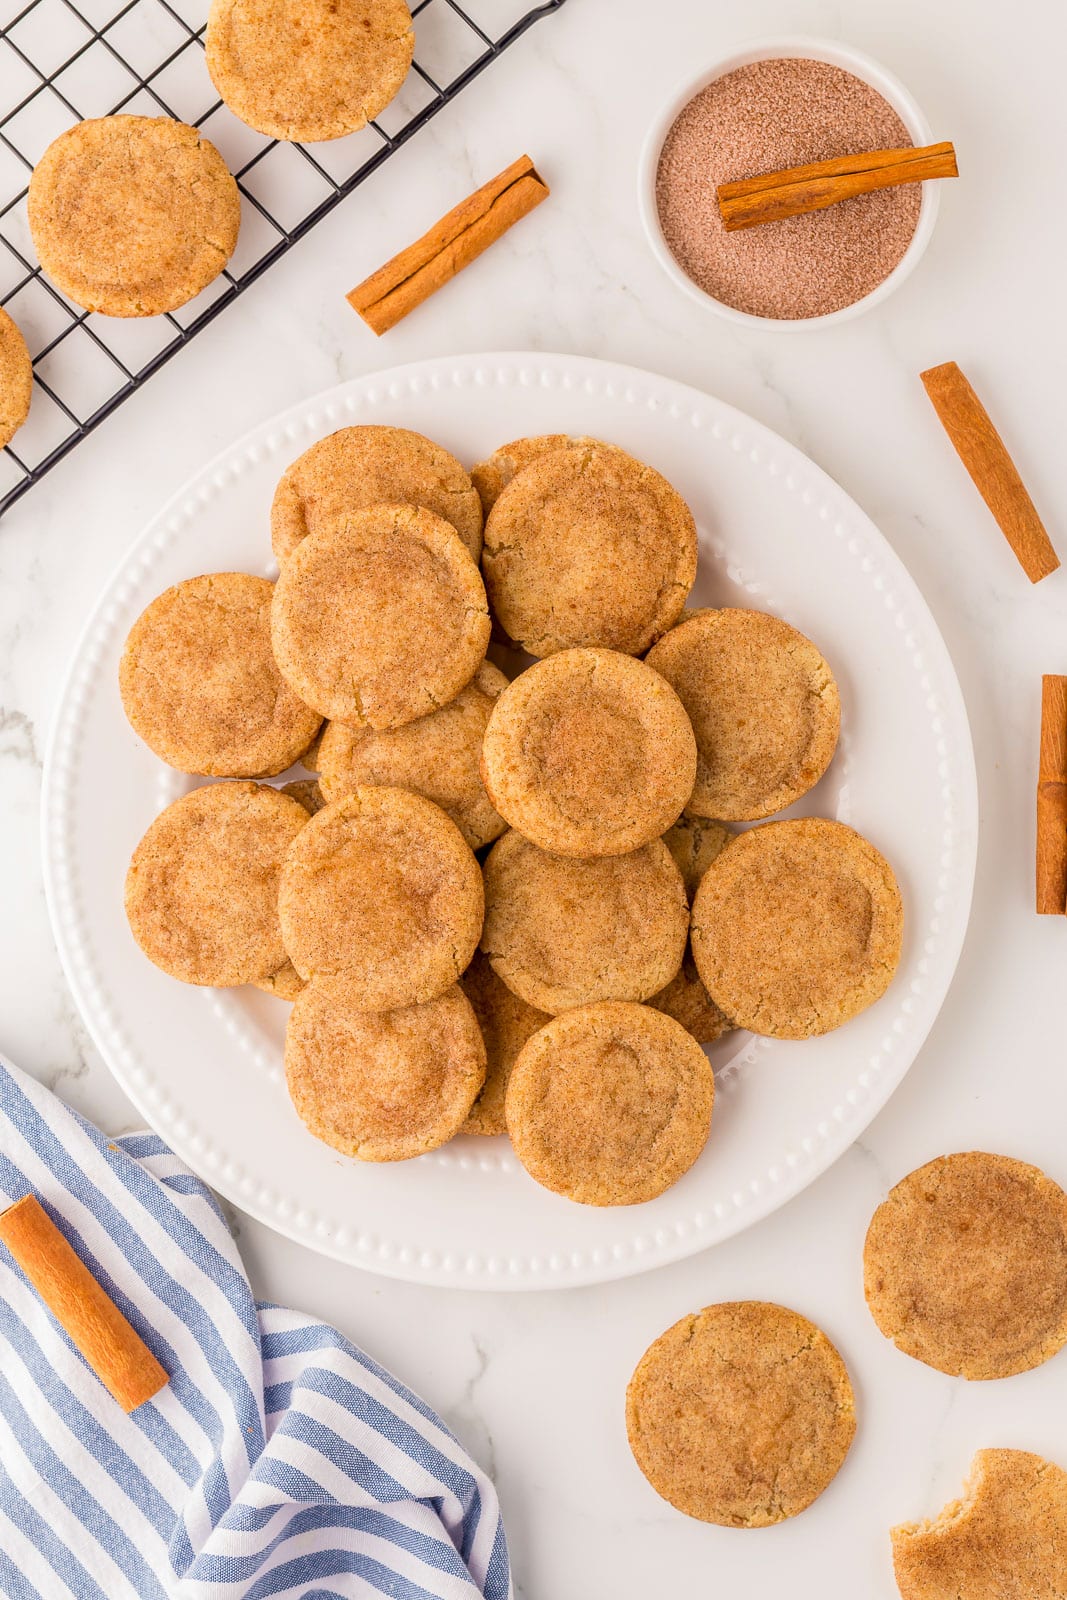 Buttery snickerdoodles on a white plate.